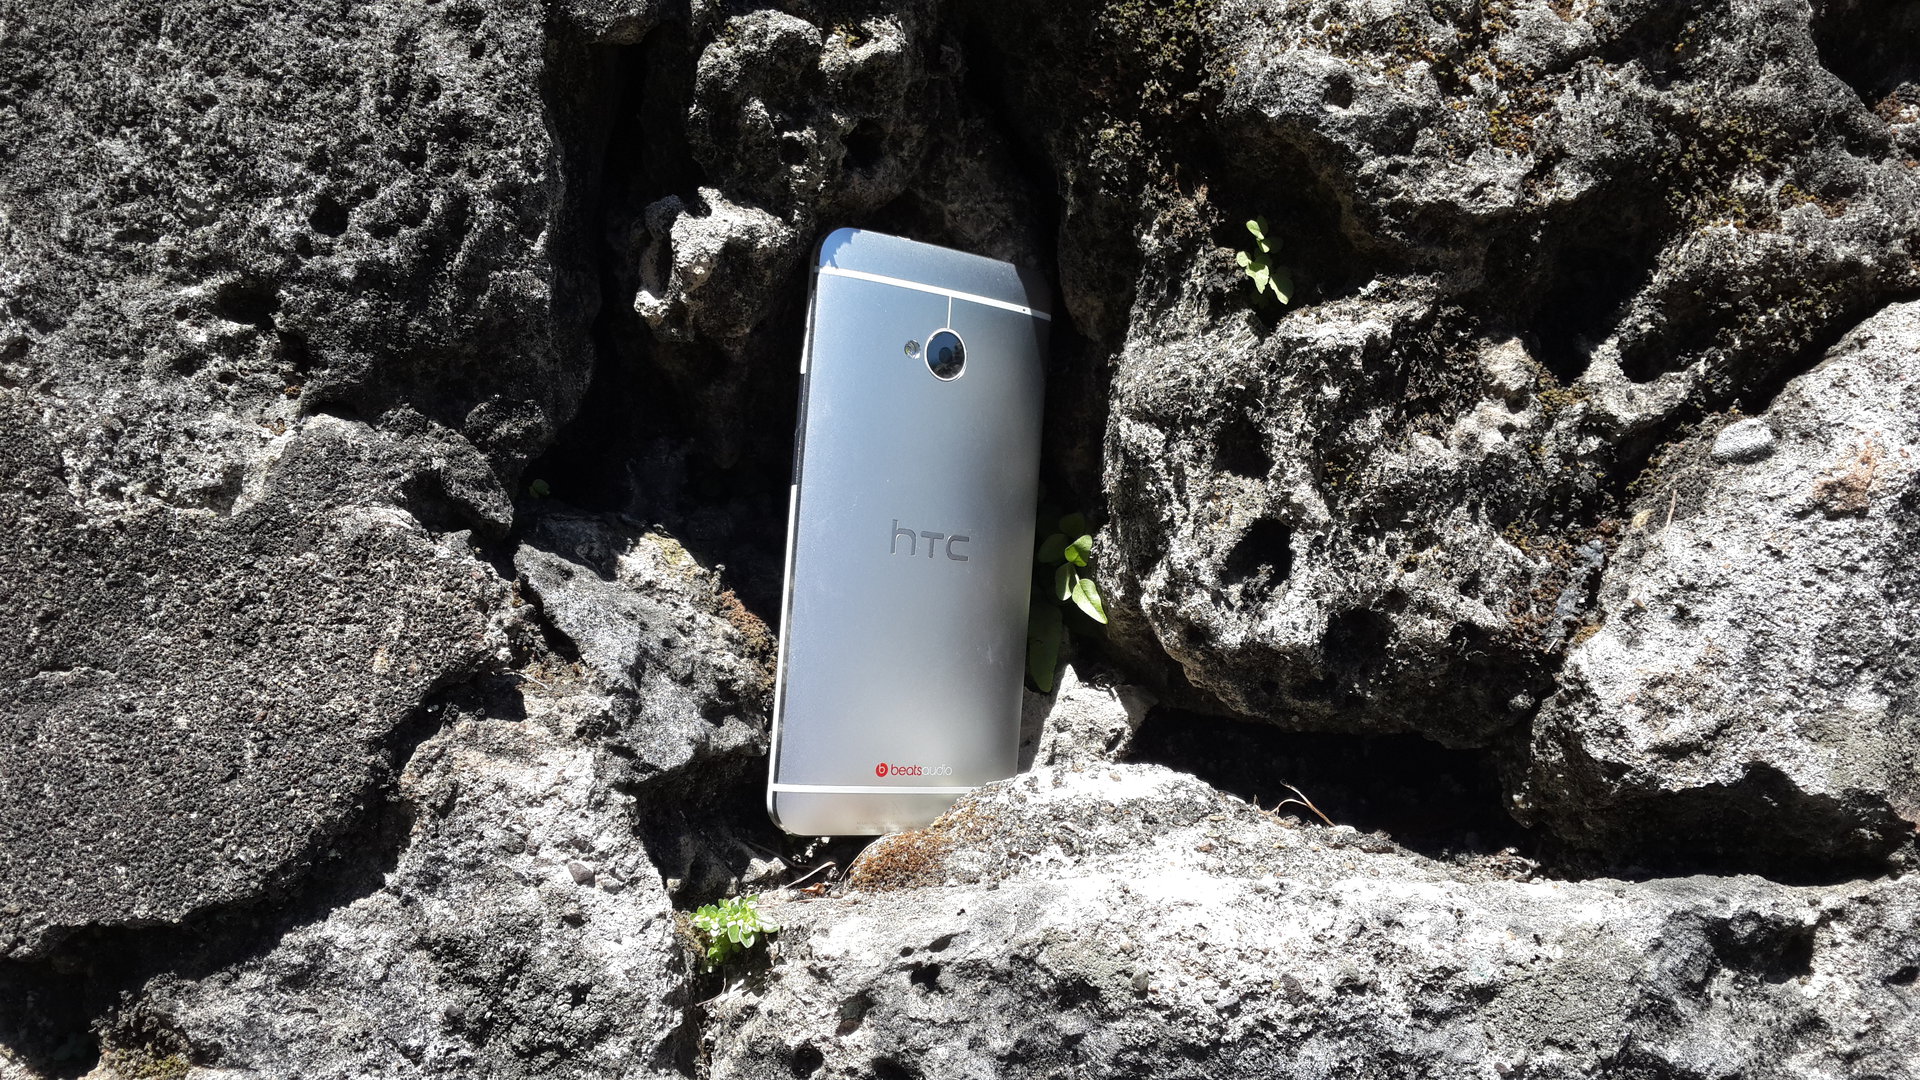 The Galaxy S4 photographs the HTCOne.